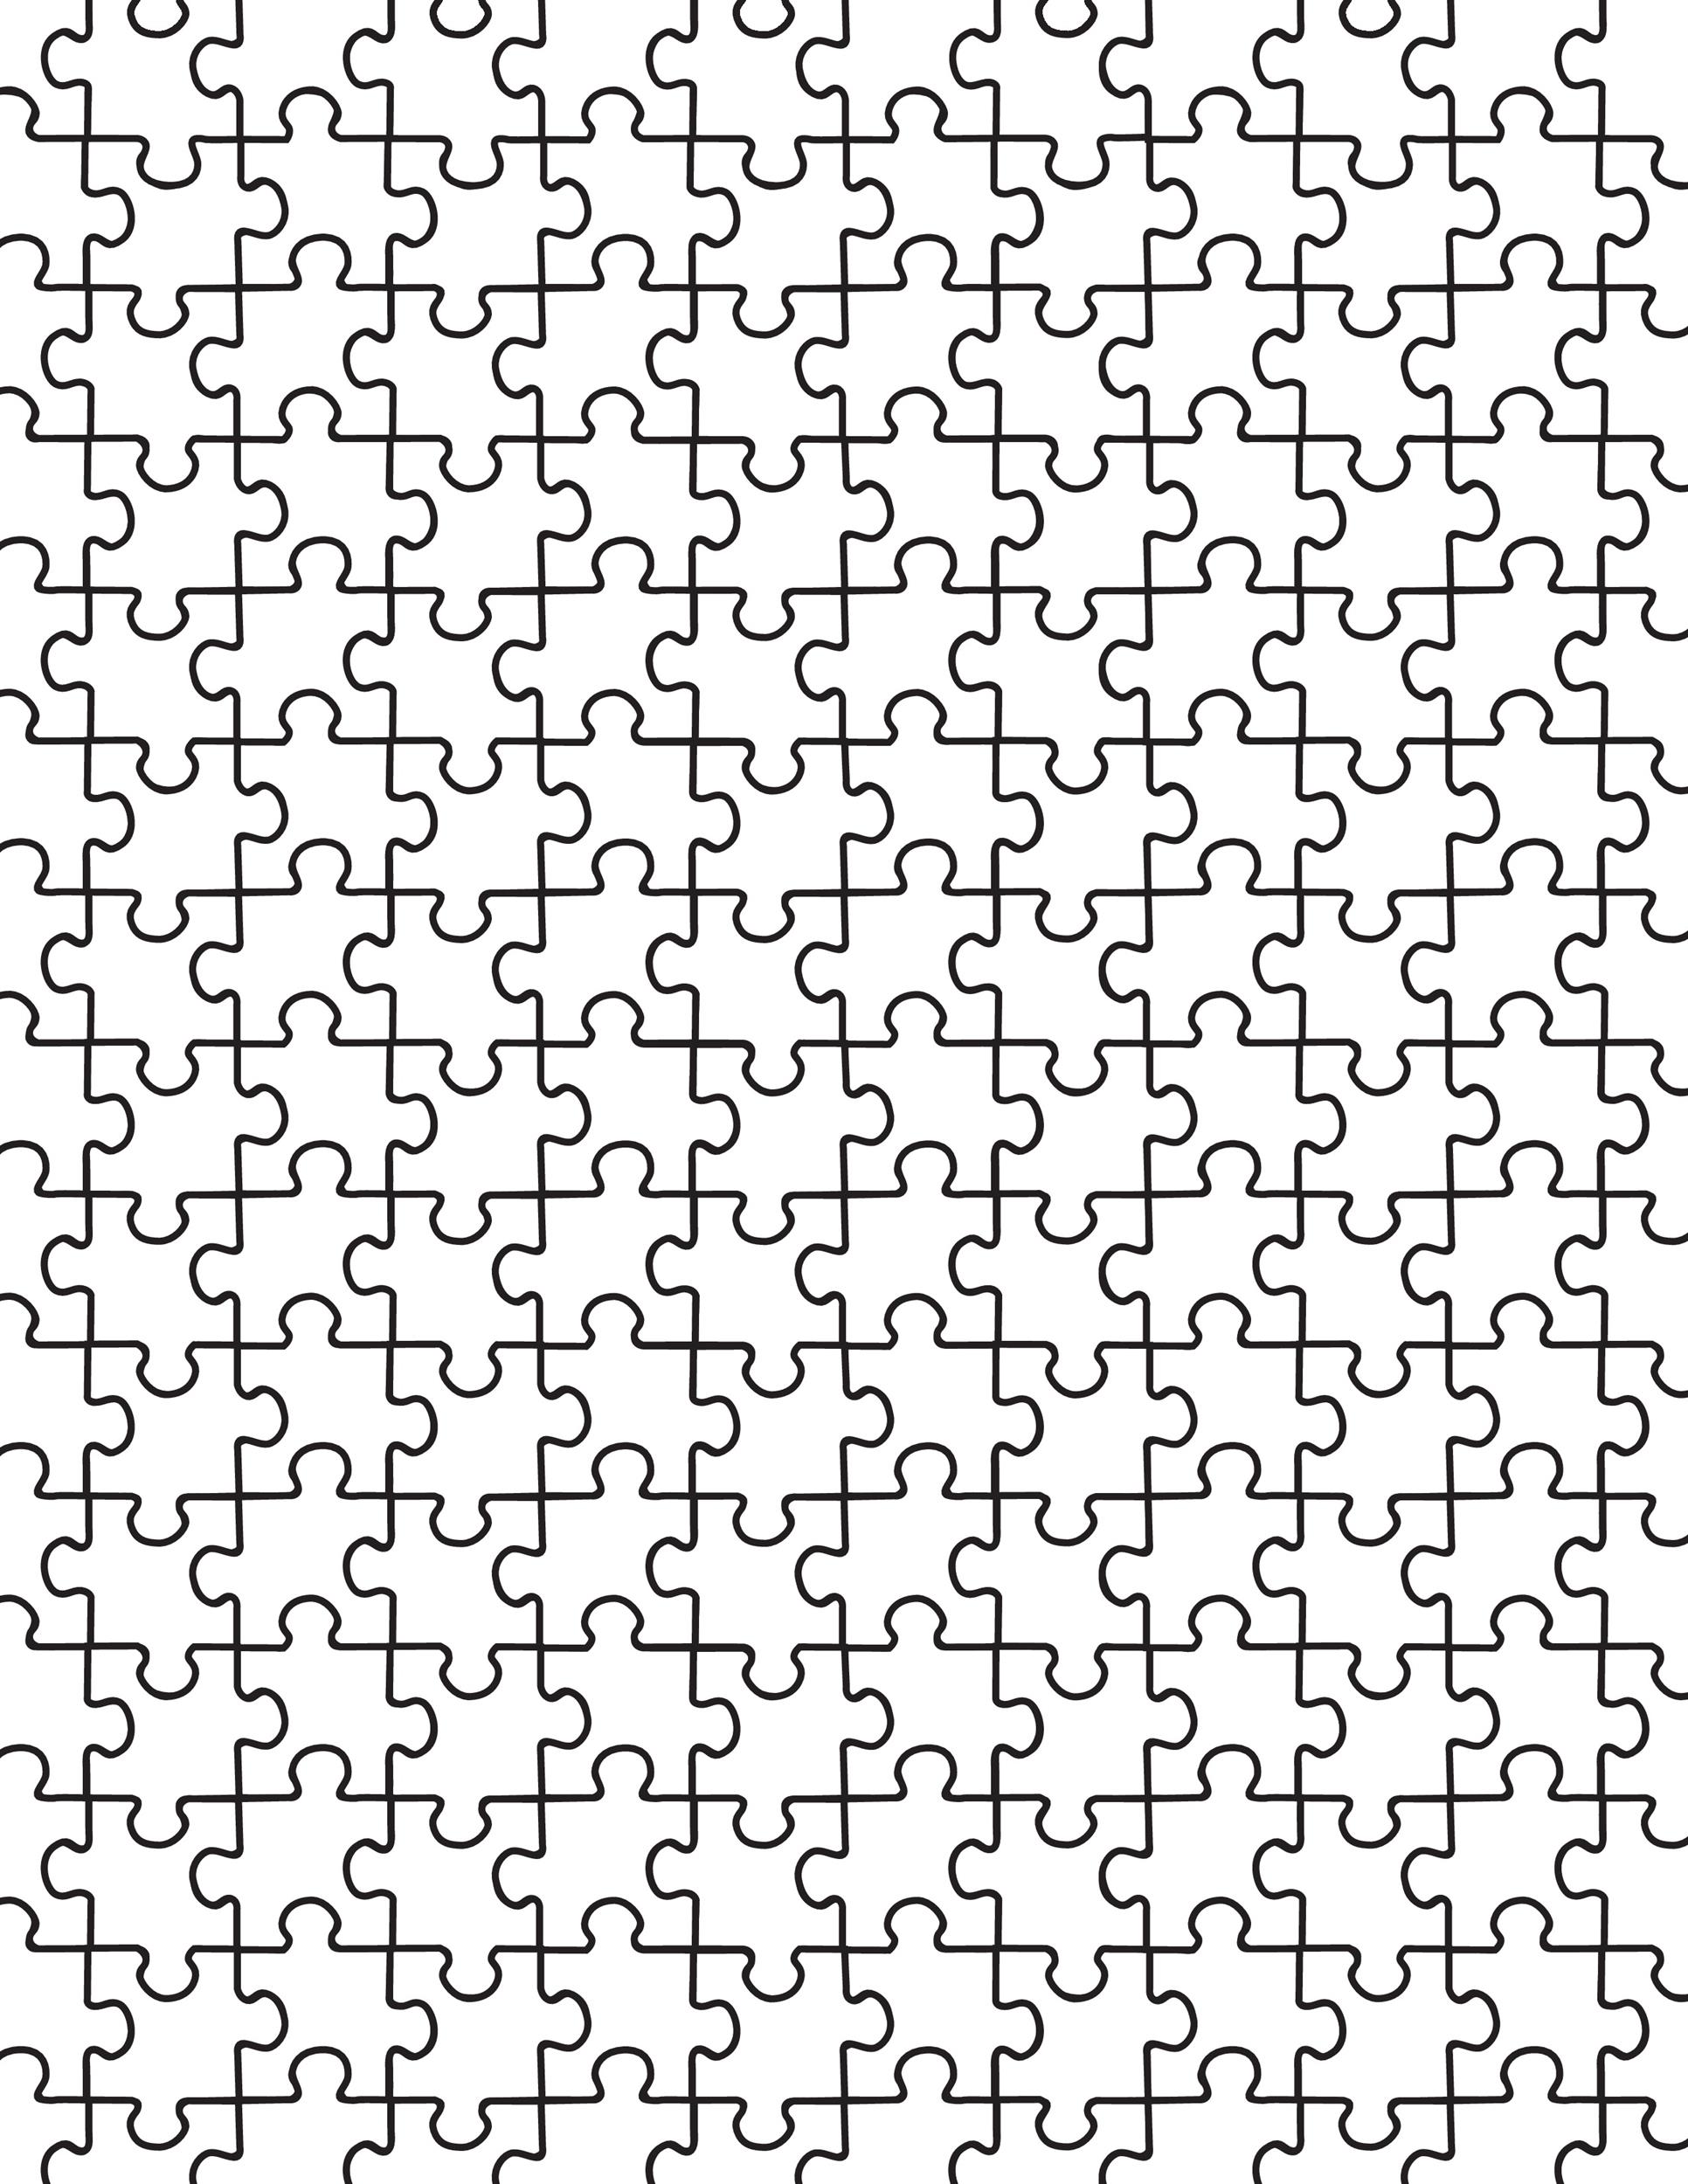 Free puzzle piece template 05